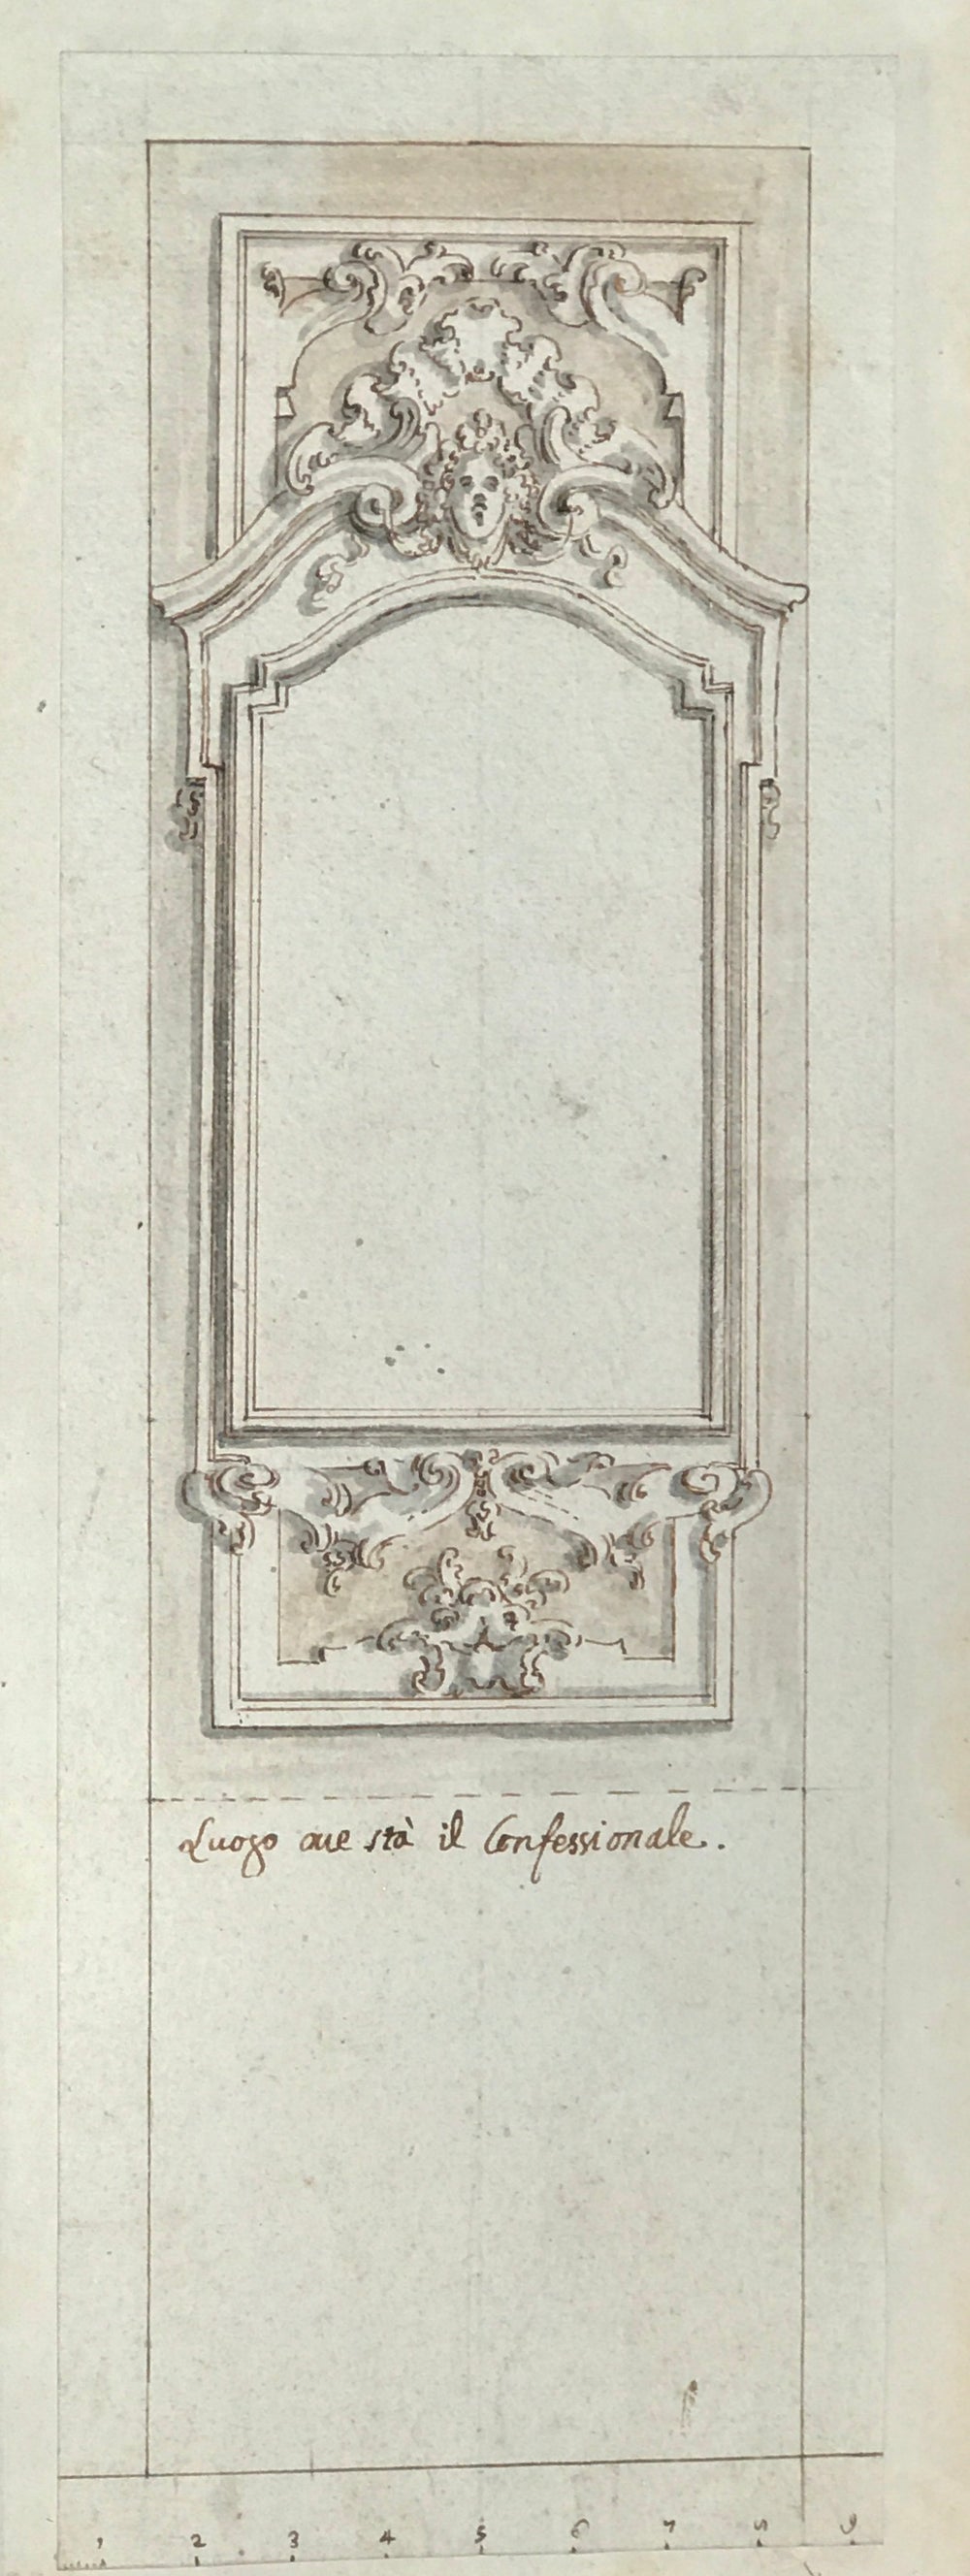 18th century project drawing for a confessional.